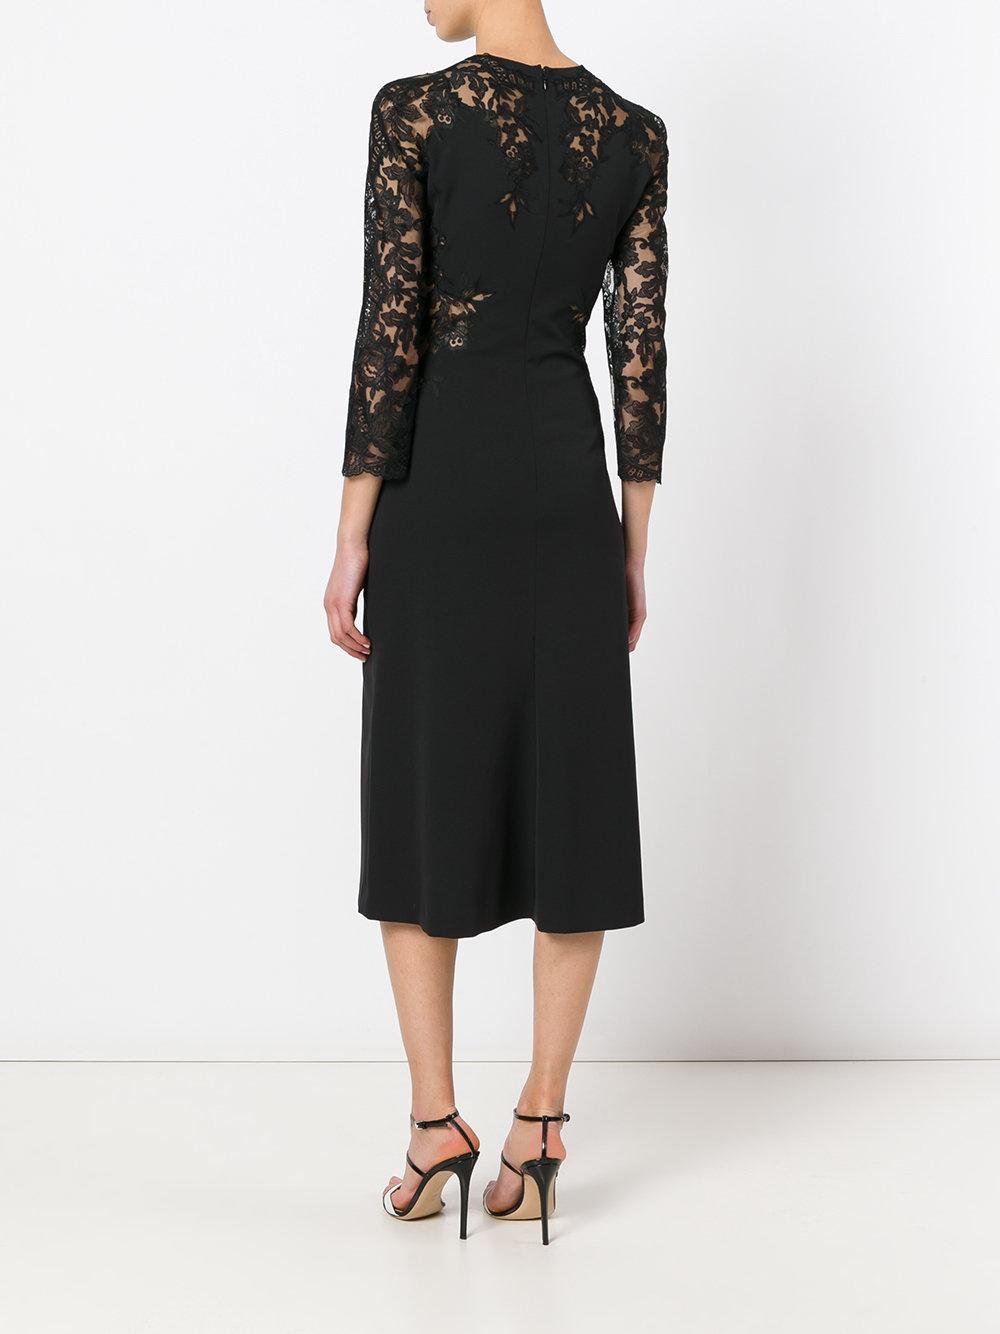 Lyst - Ermanno Scervino Lace Sleeve Mid-length Dress in Black